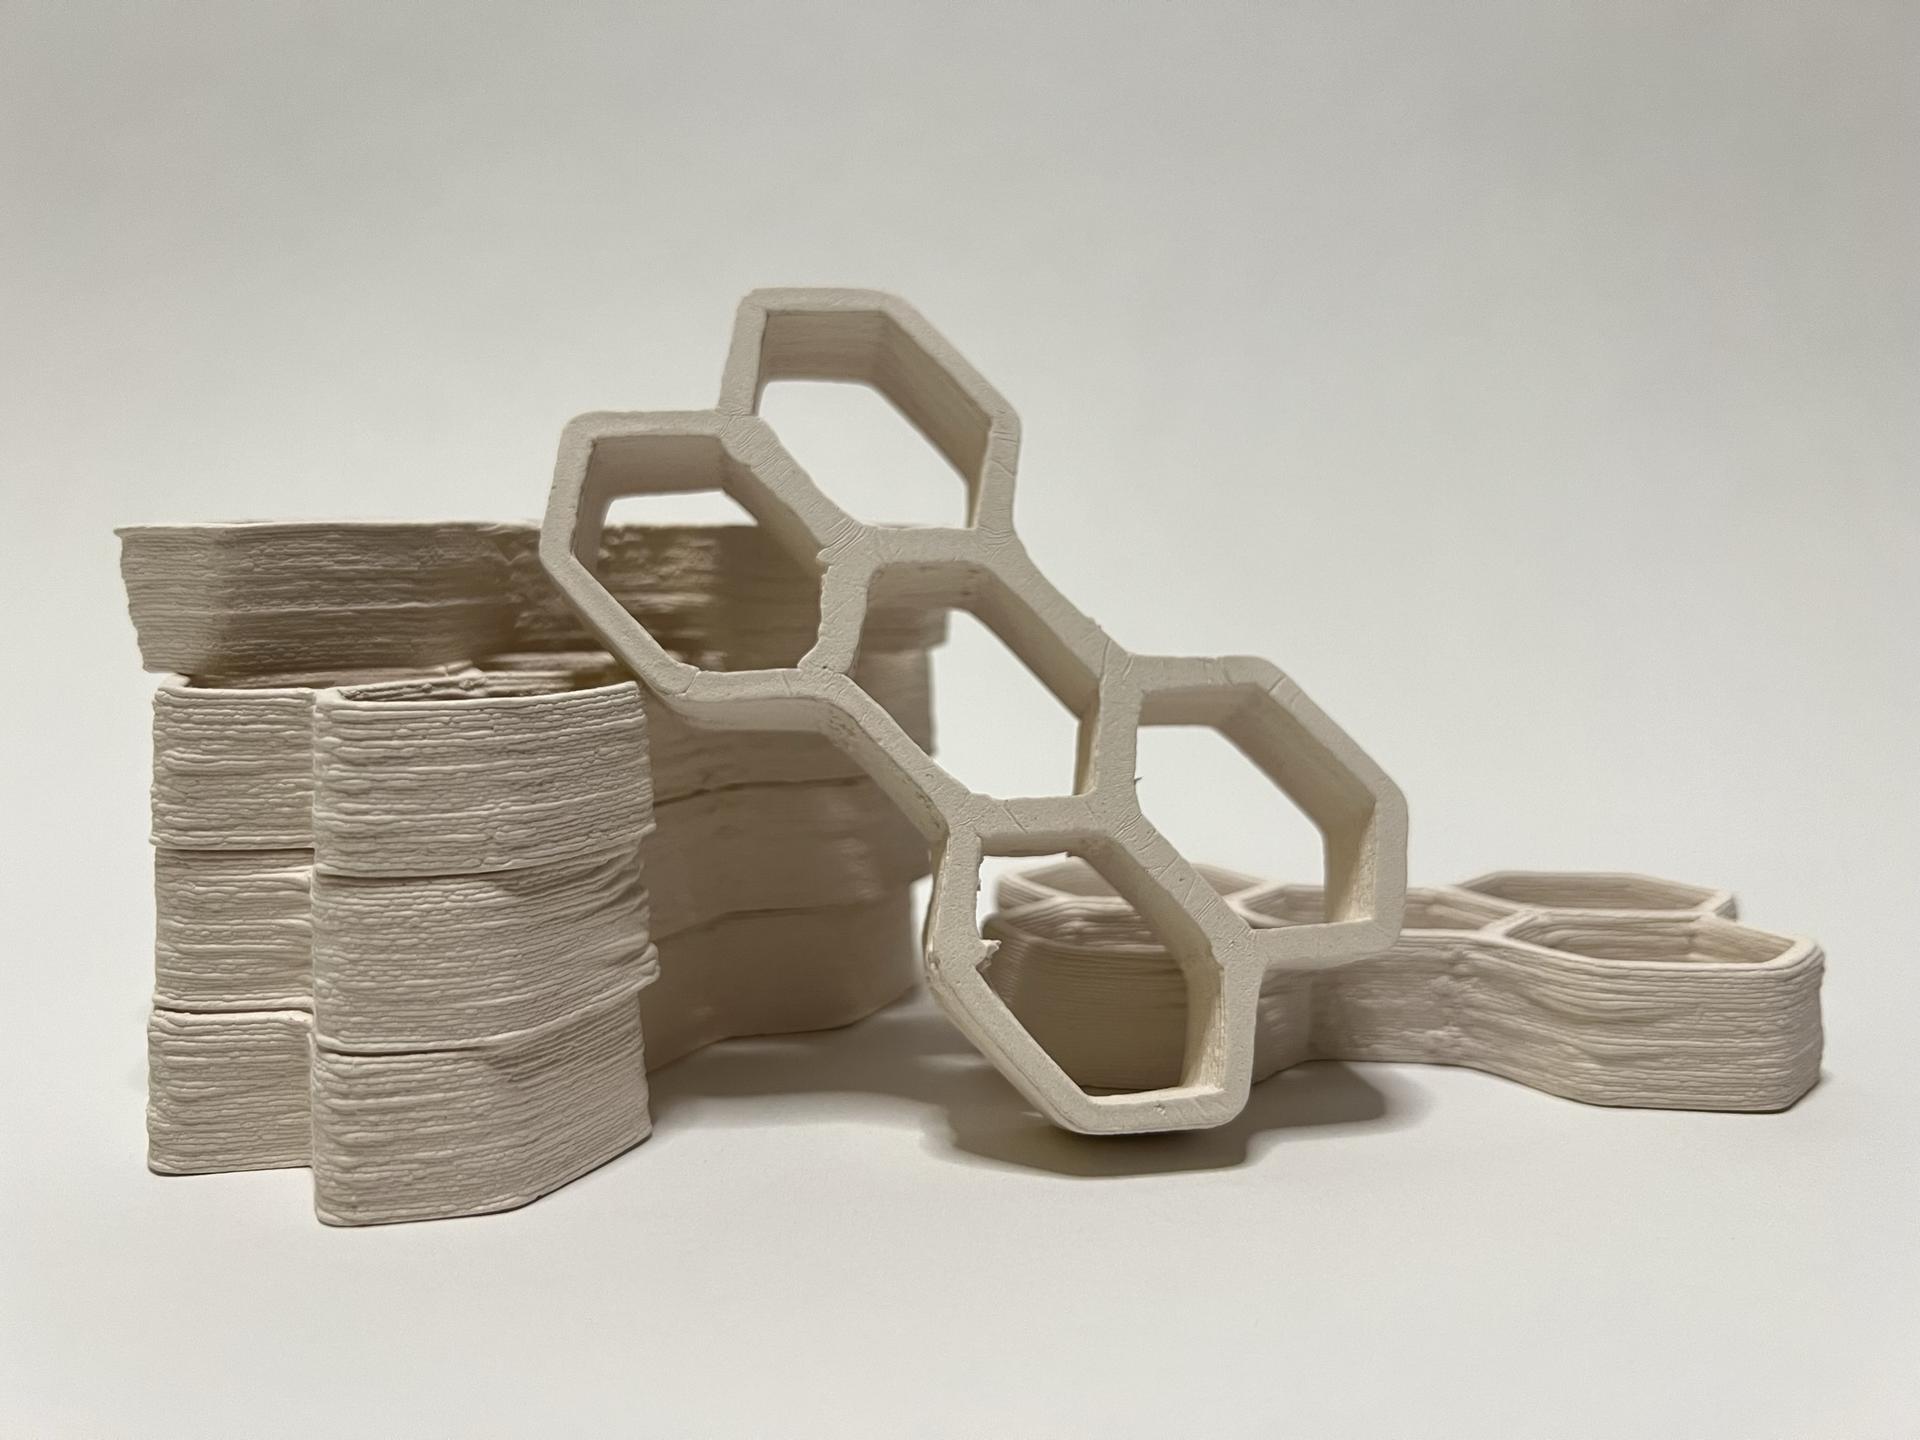 Building block made of ancient materials/biocomposite (hemp and clay) using digital fabrication (3D printing)